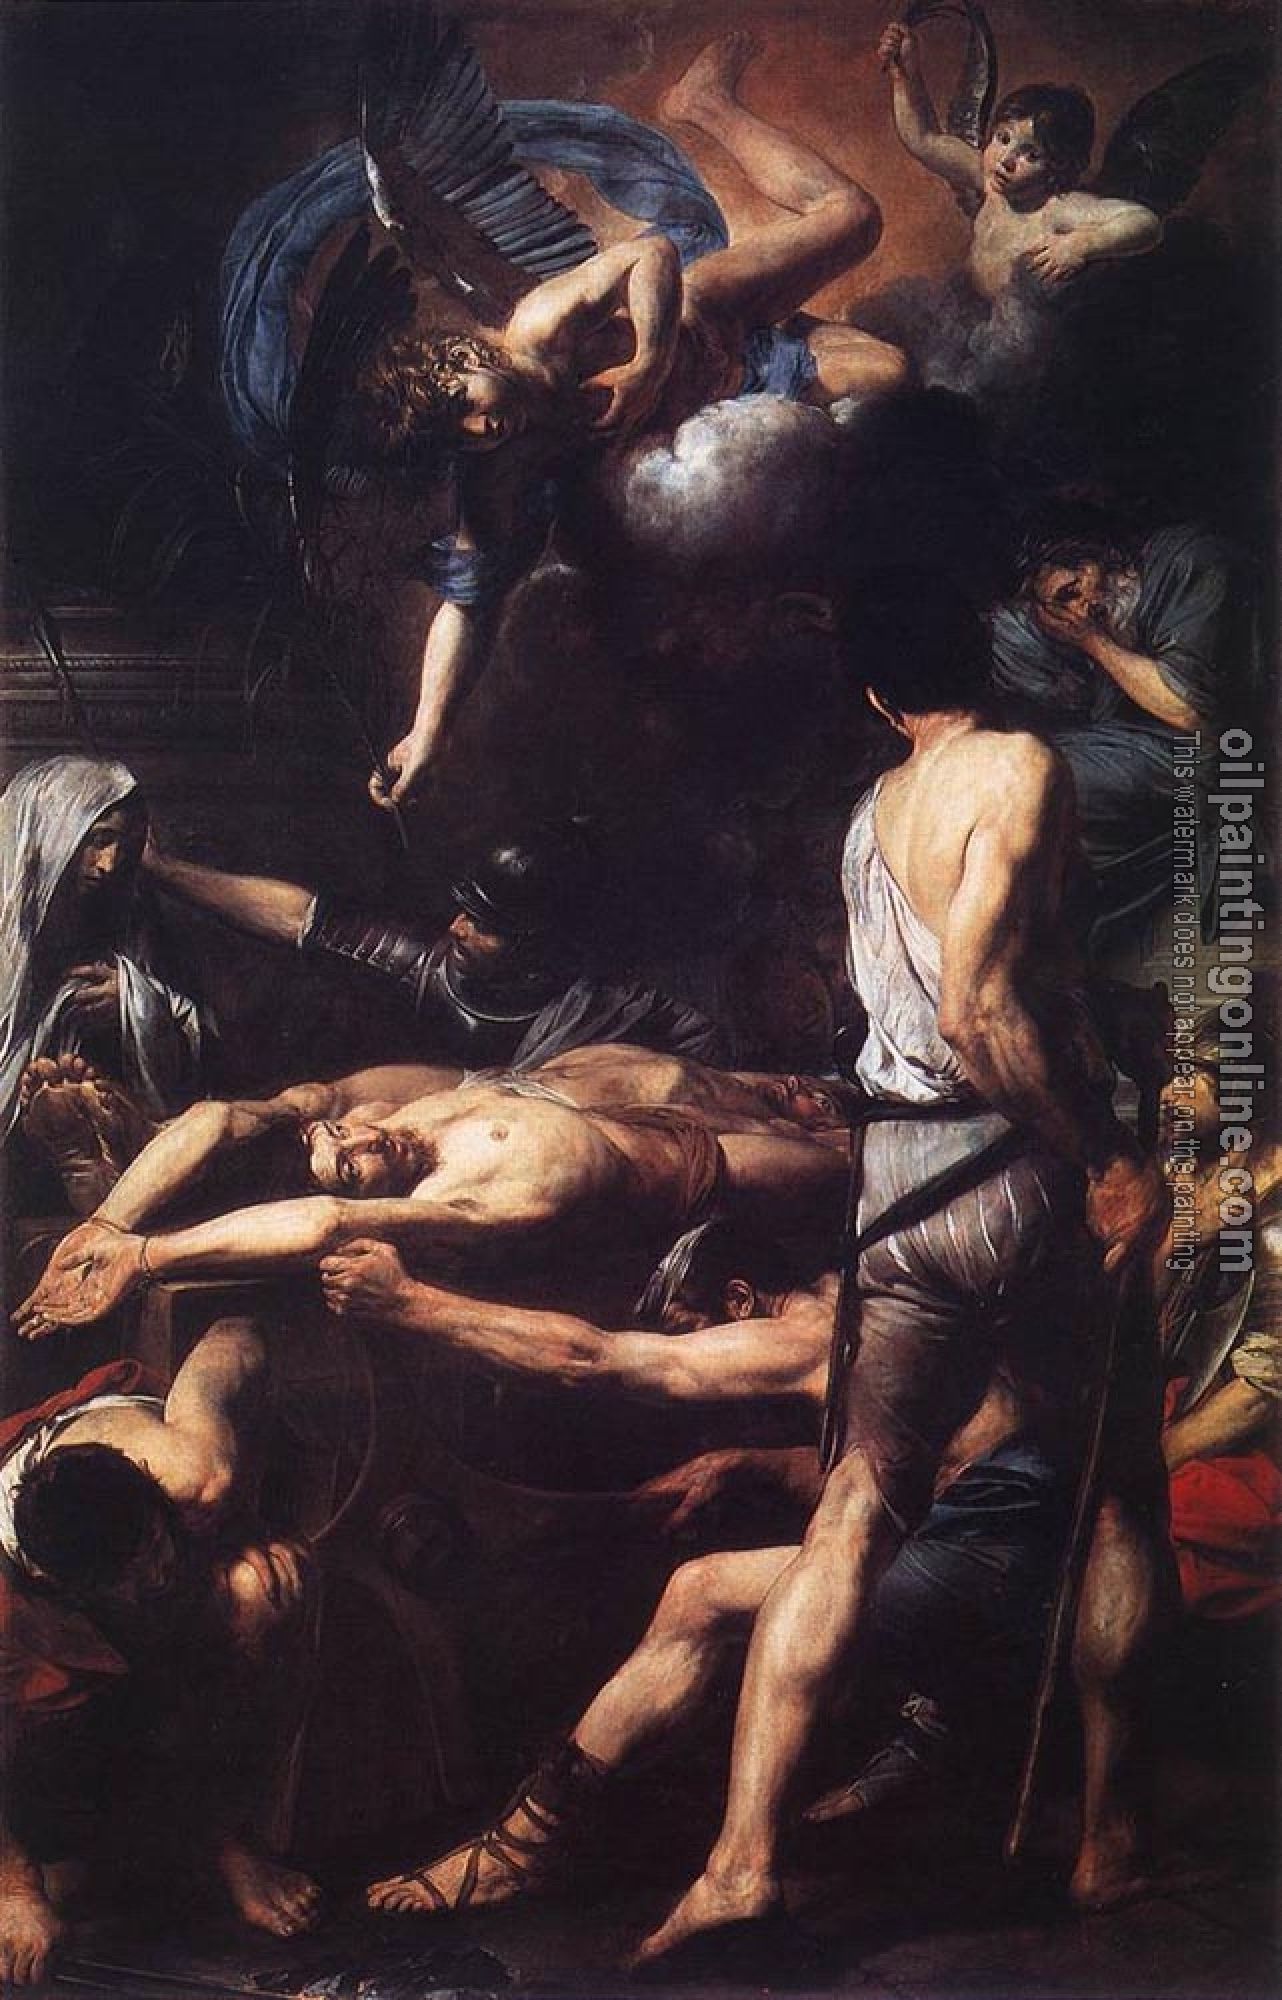 Valentin, Jean de Boulogne - Martyrdom of St Processus and St Martinian